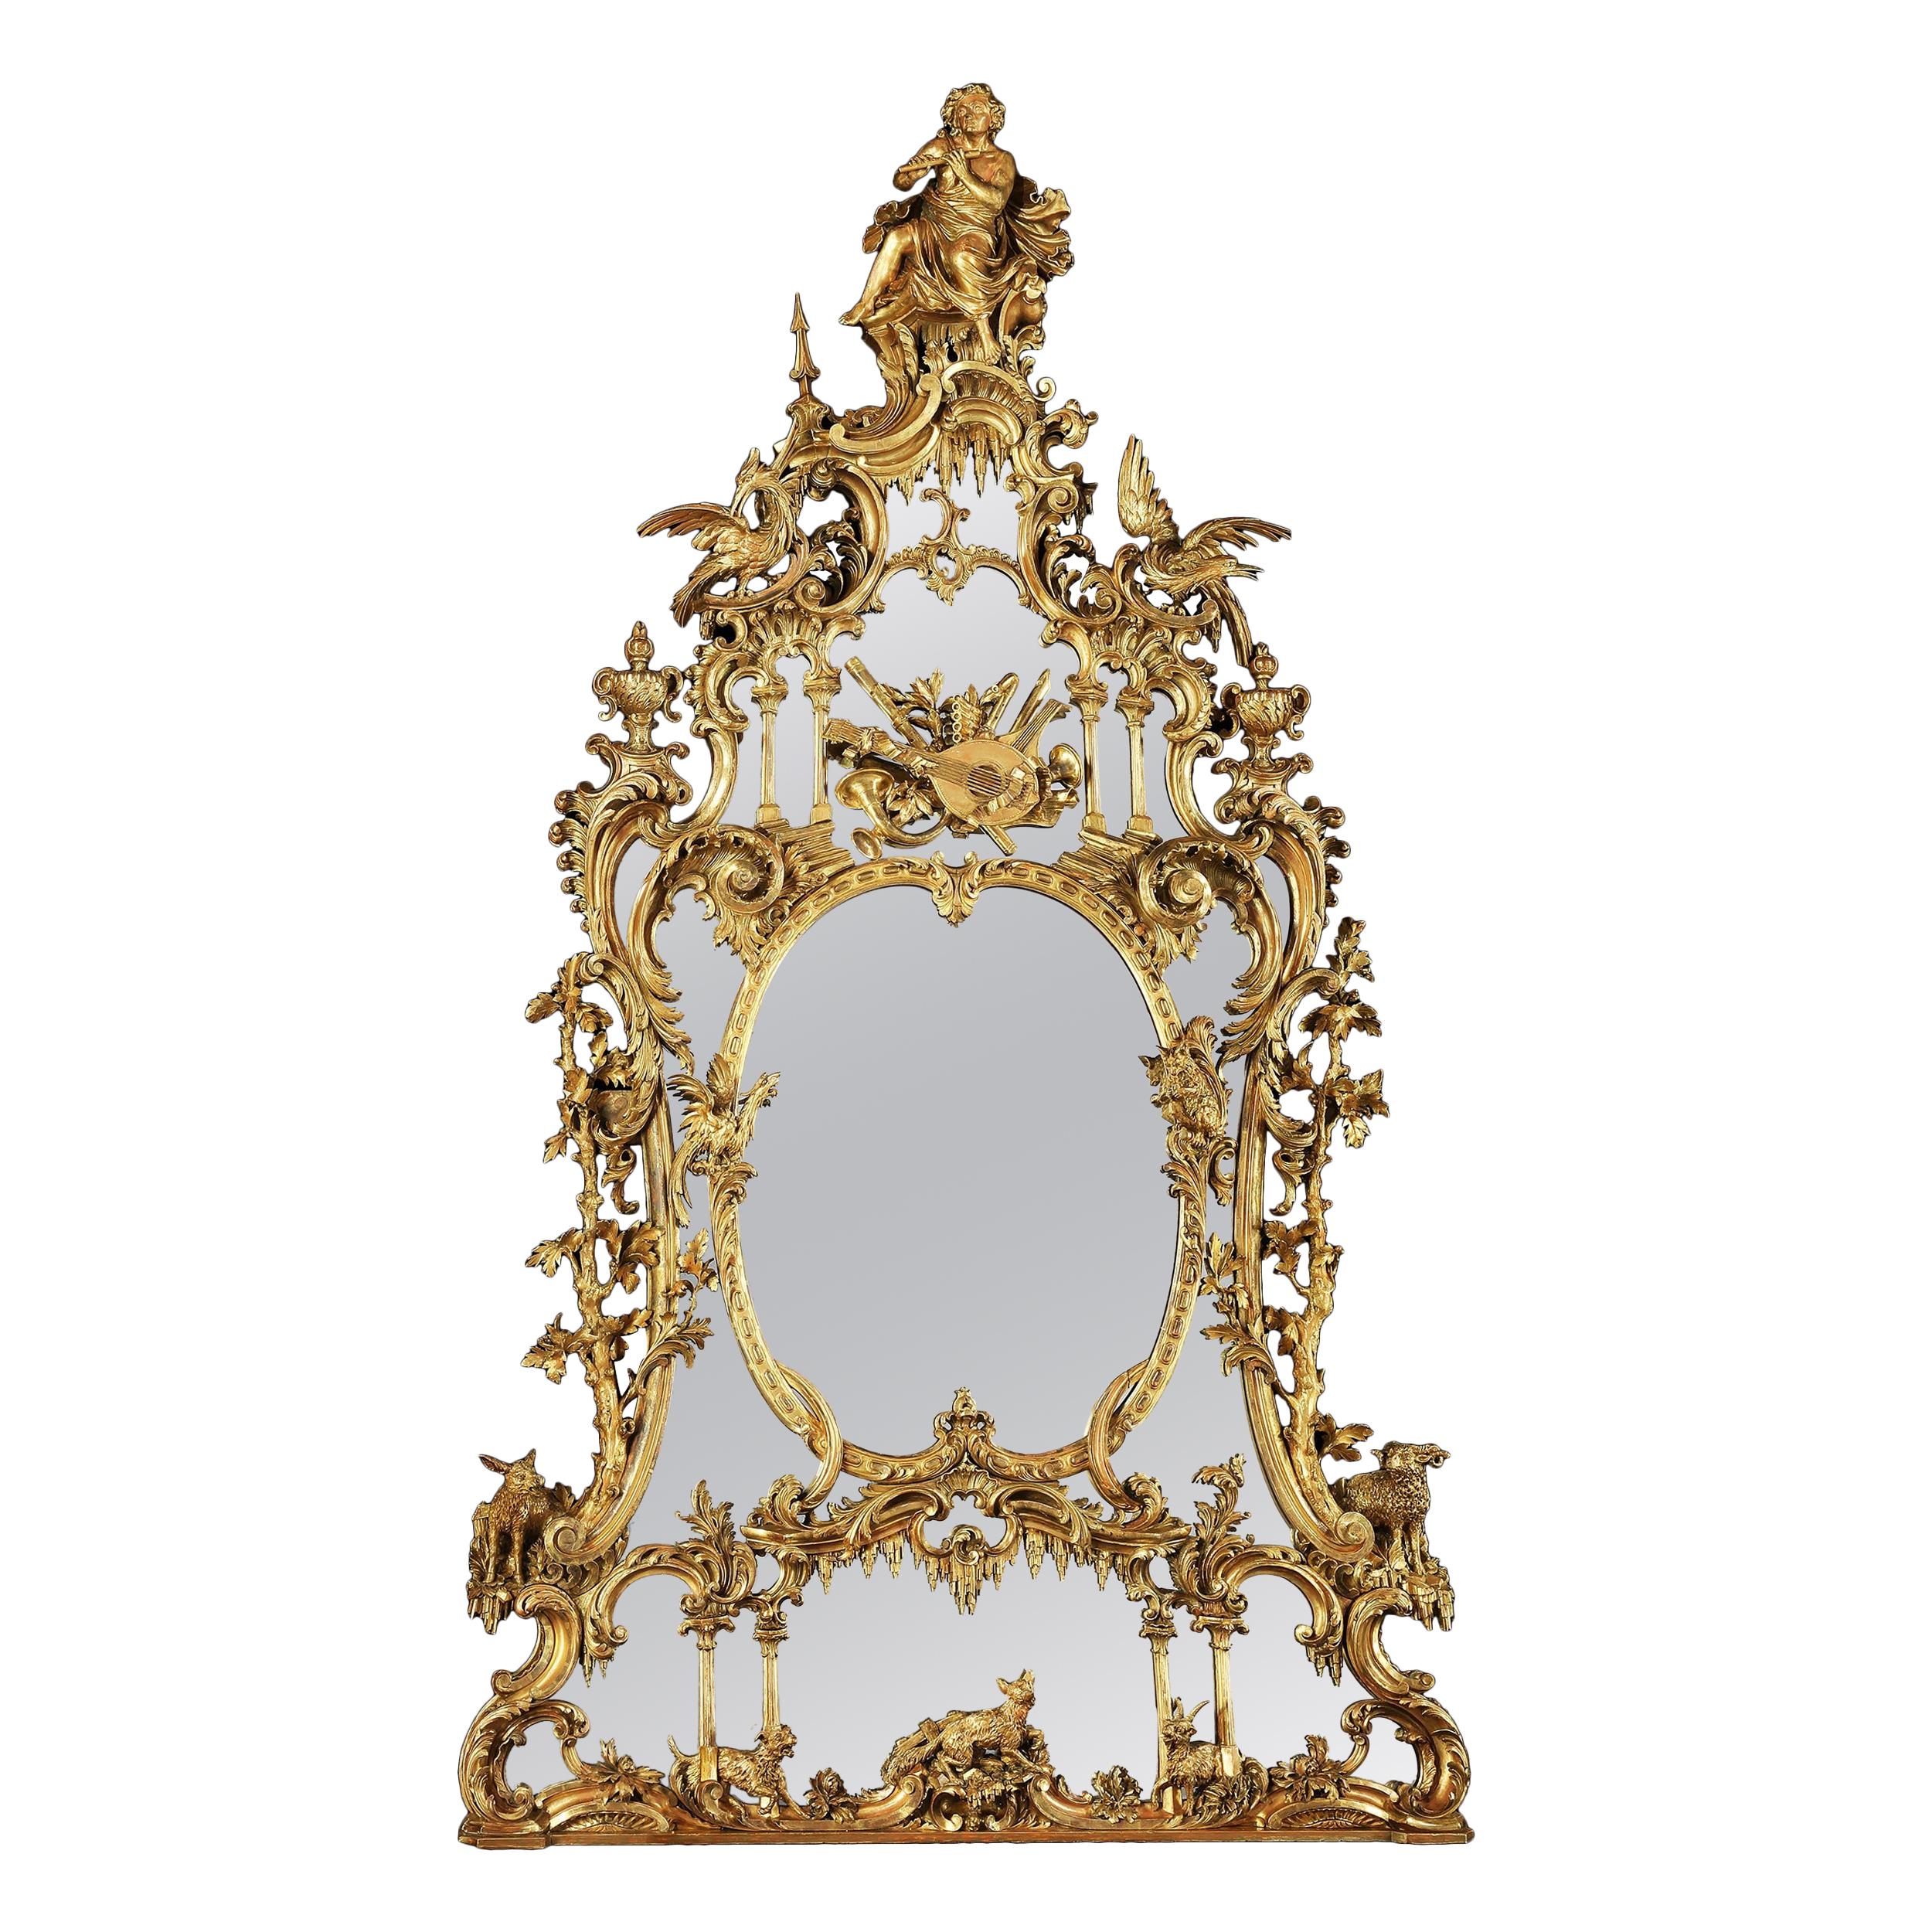 19th Century George III Style Carved Mirror after a design by Thomas Johnson